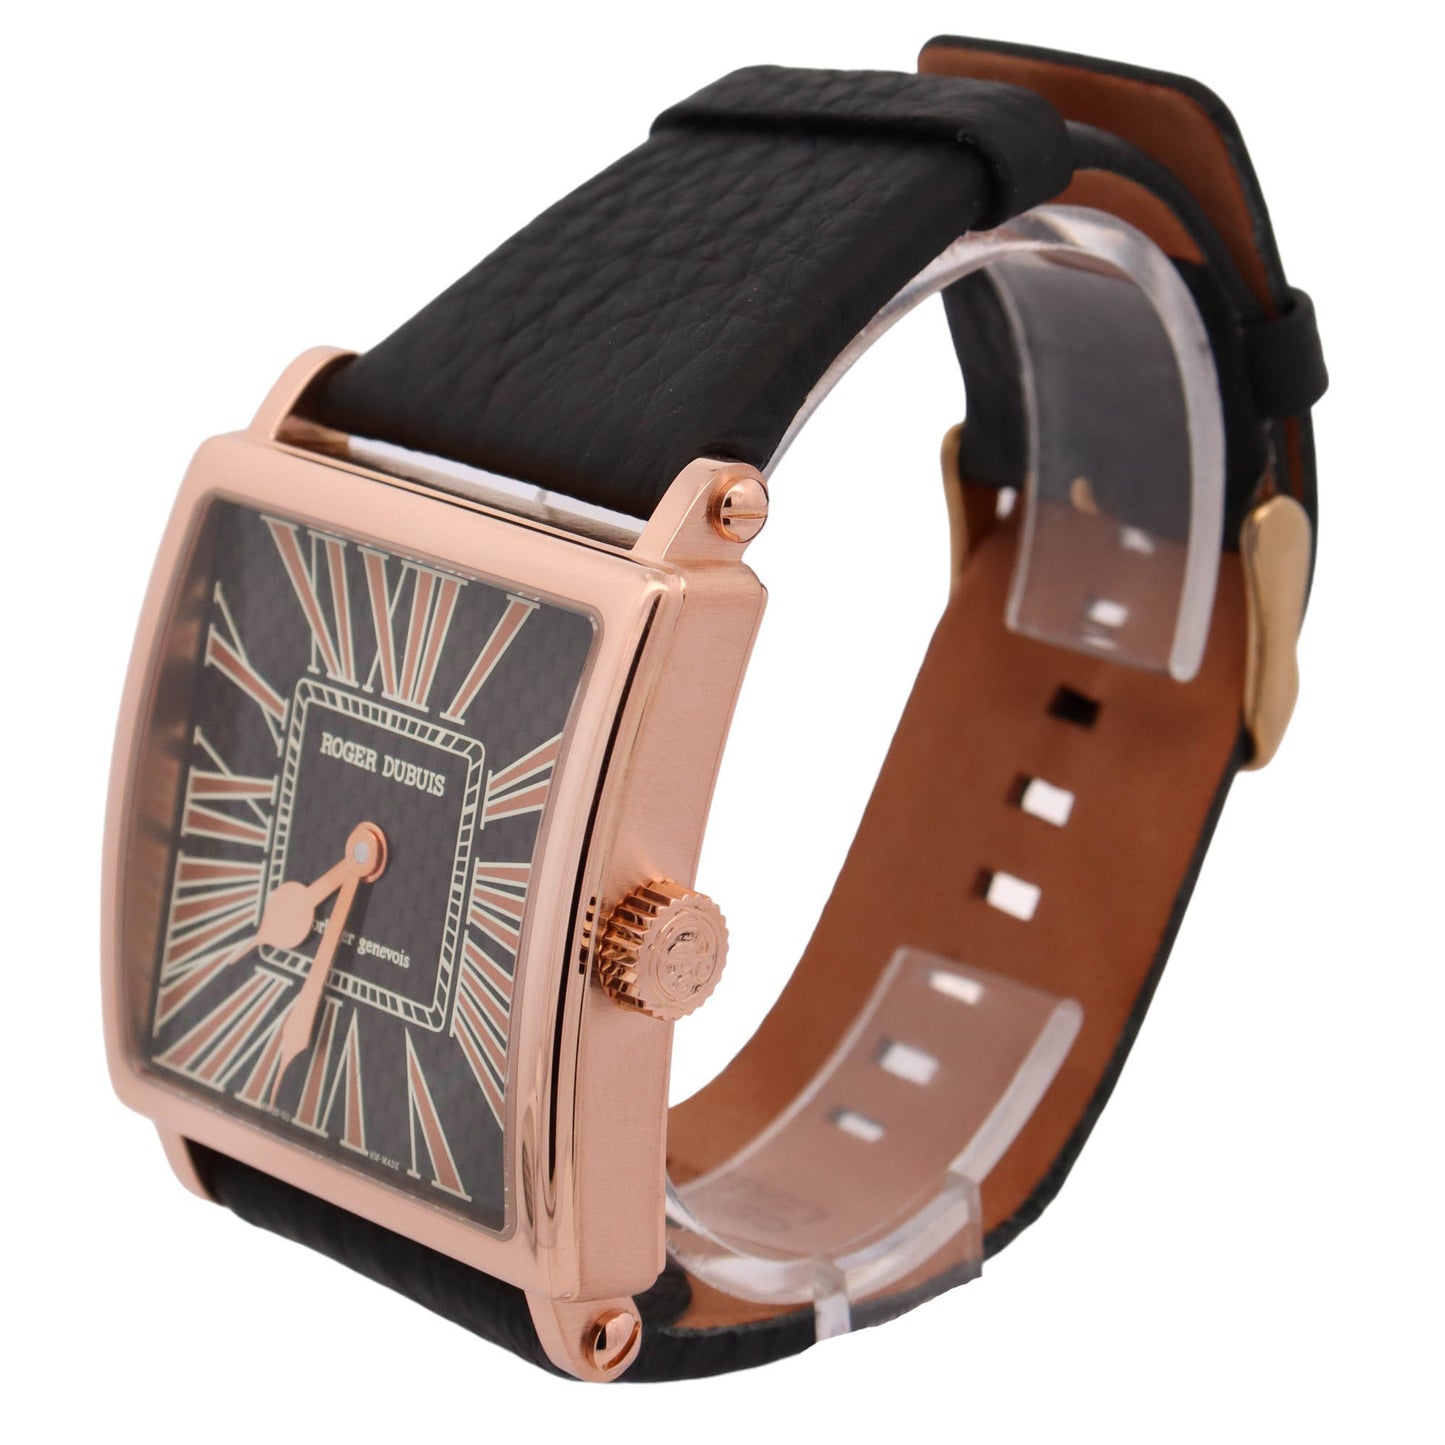 Roger Dubuis Golden Square Limited Edition Rose Gold 40mm x 50mm Black Roman Dial Watch Reference# G40 14 5 G99.72 - Happy Jewelers Fine Jewelry Lifetime Warranty